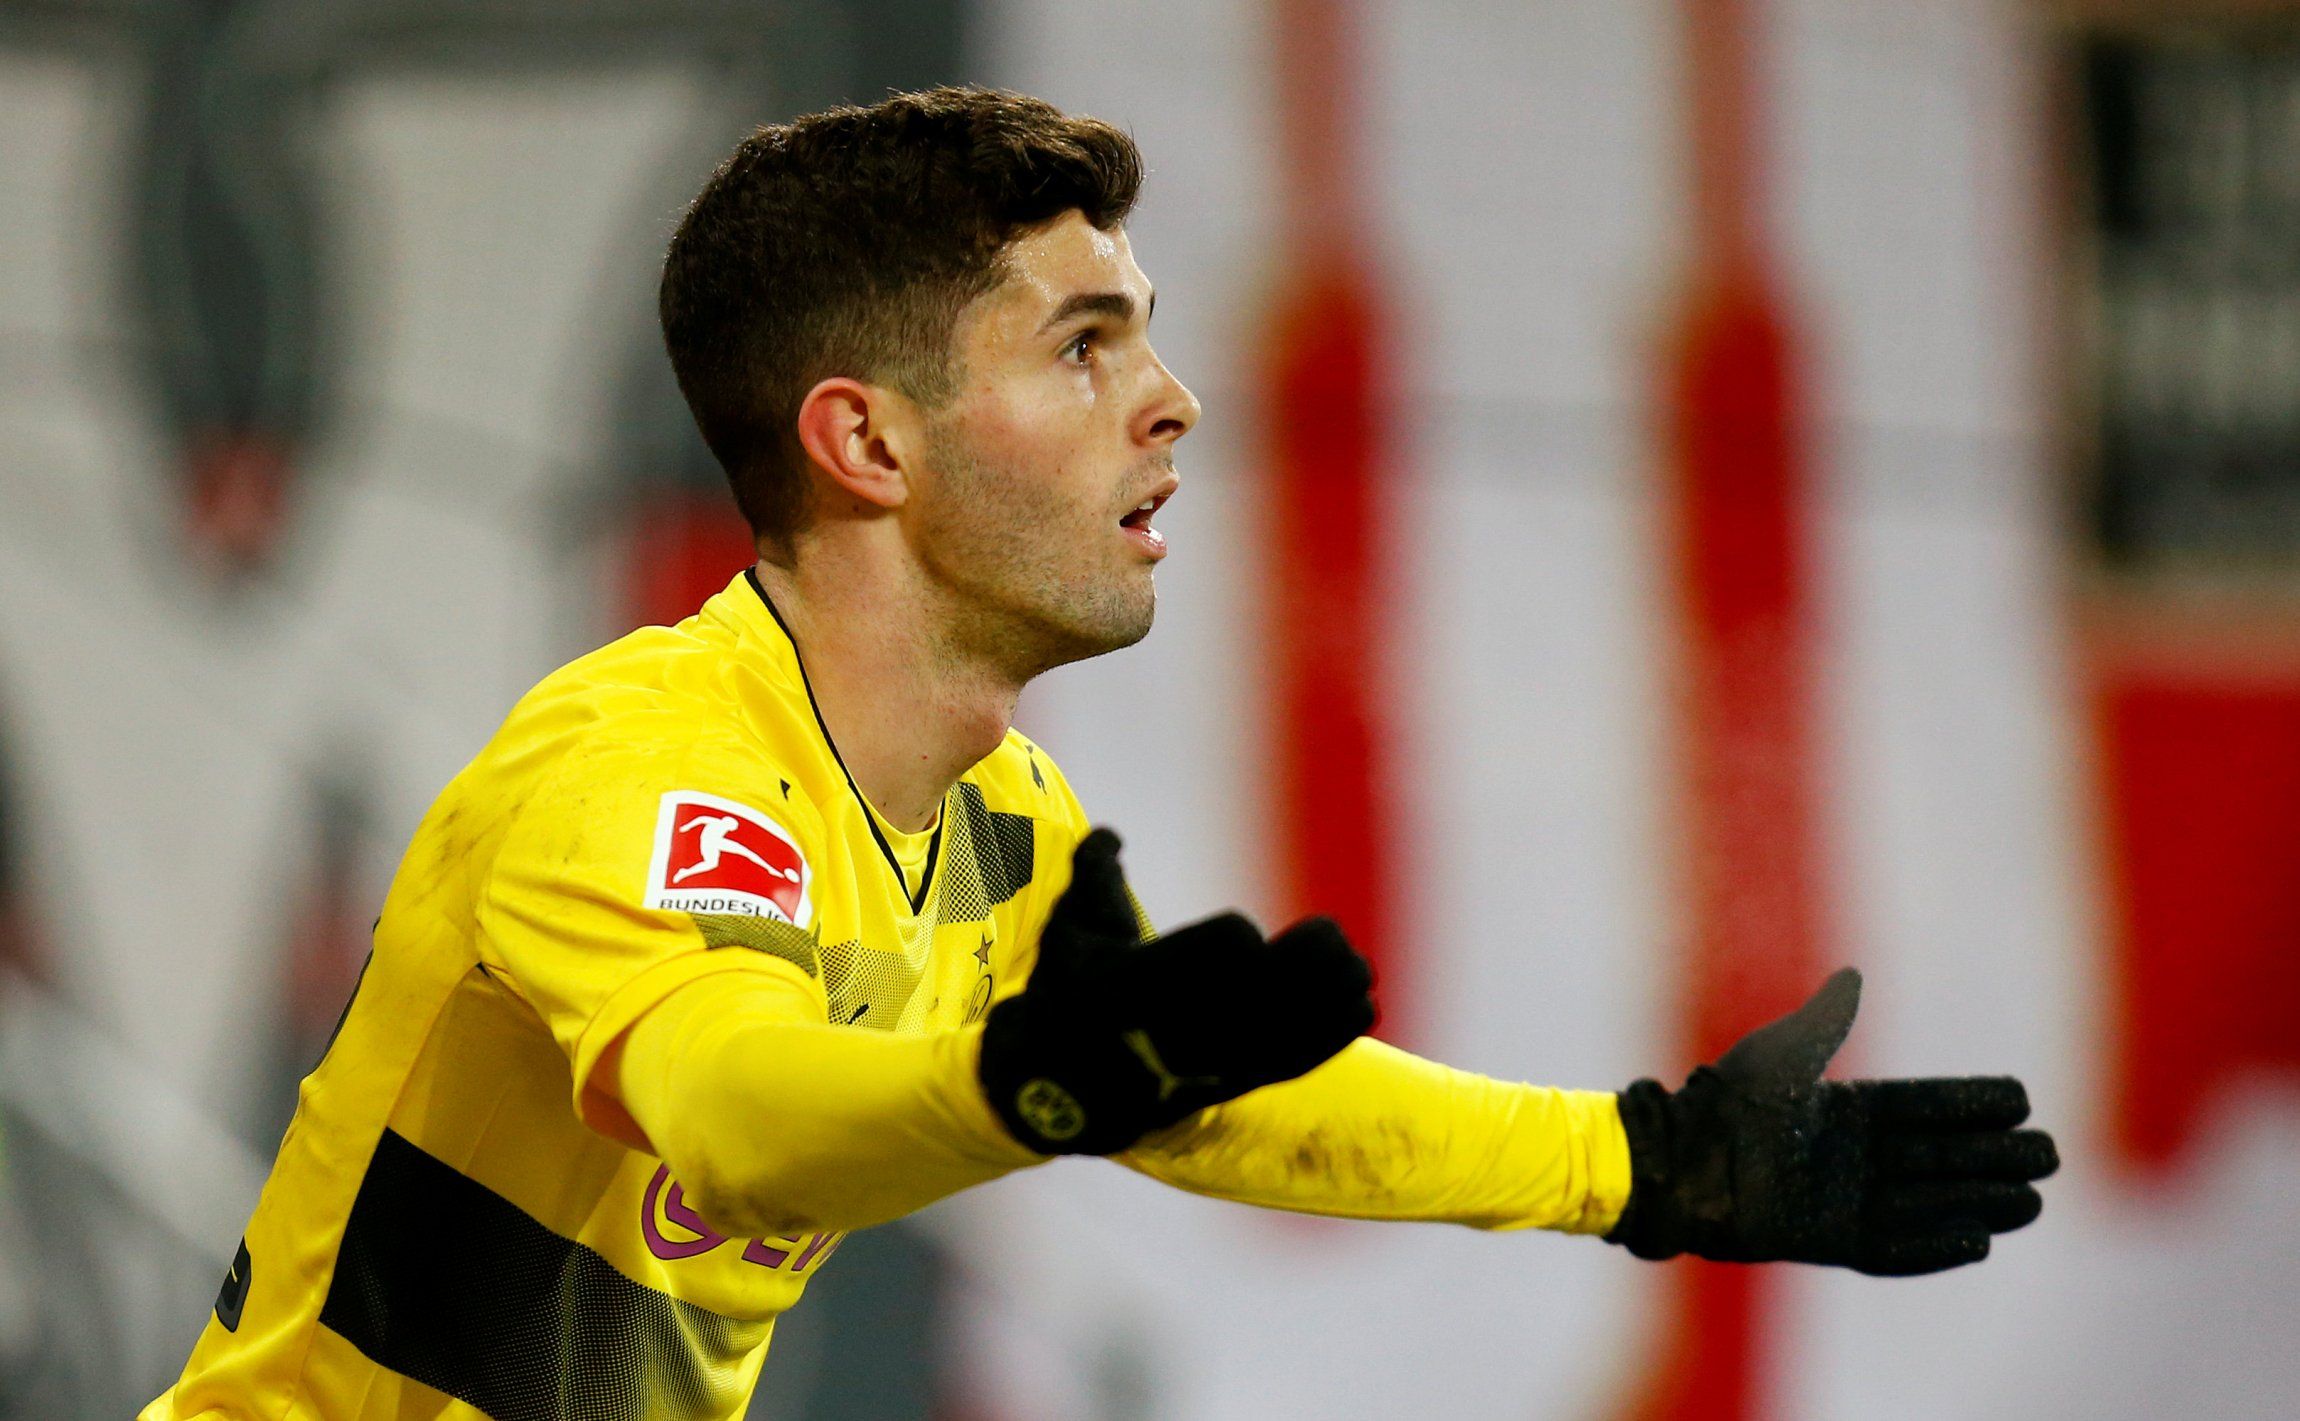 Christian Pulisic in action for Borussia Dortmund against Mainz